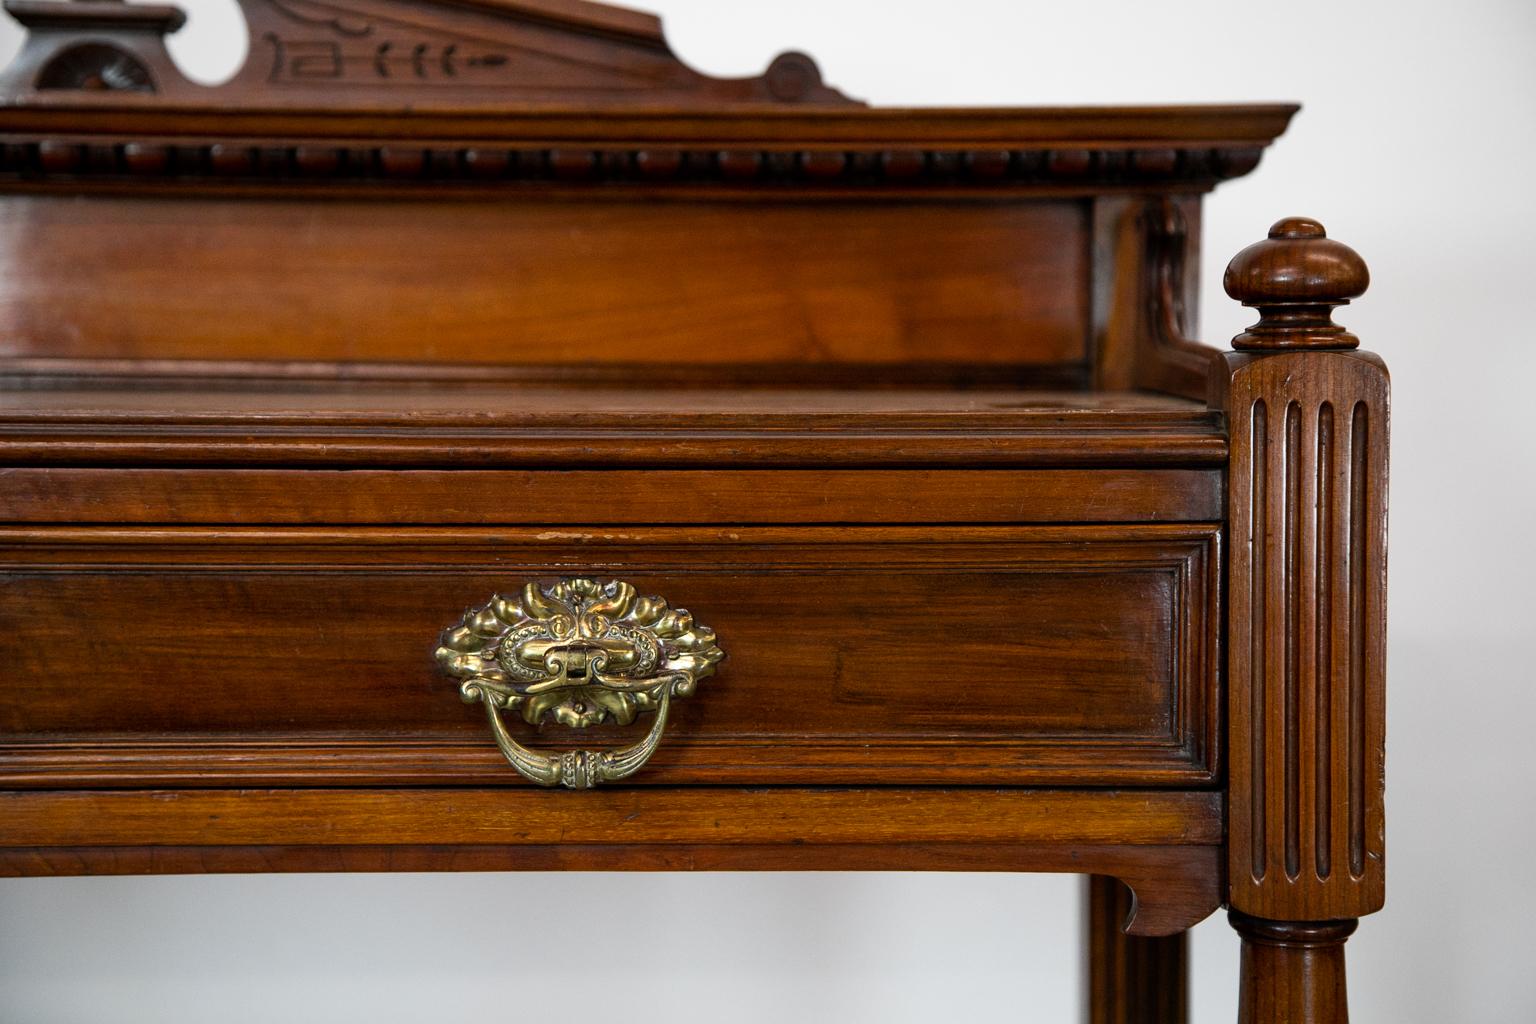 The back gallery of this two-tiered mahogany serving cupboard has a carved broken pediment top that rests on a crown molding that has carved egg and dart motif on the underside. The side galleries on the upper shelf have molded top edges that taper